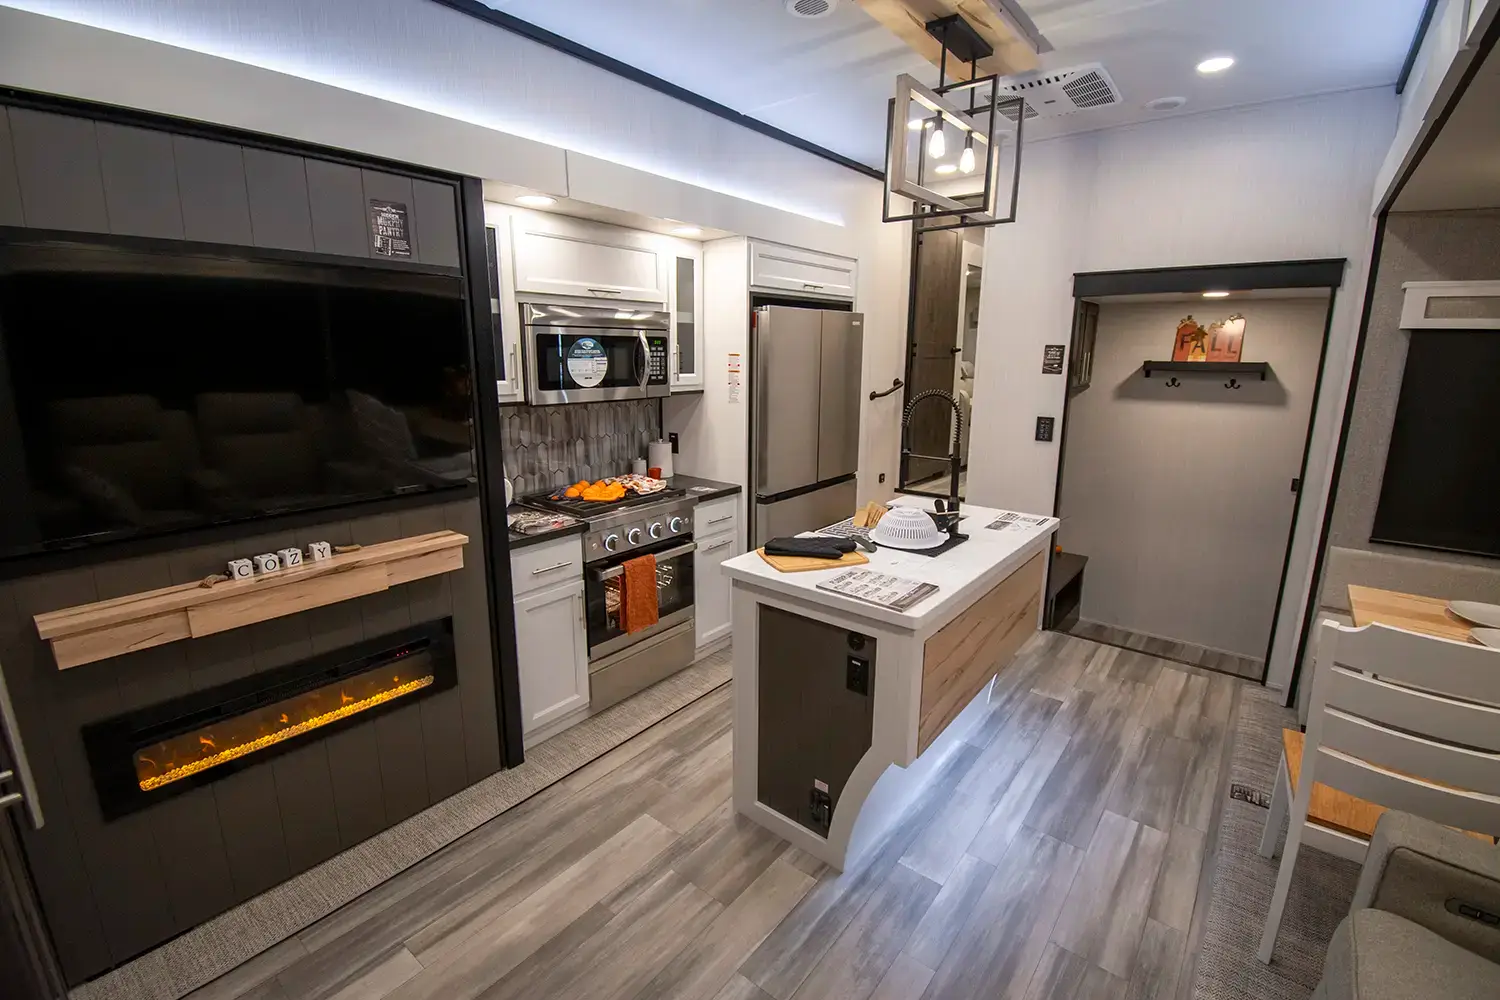 There's a fifth wheel with a mud room?!